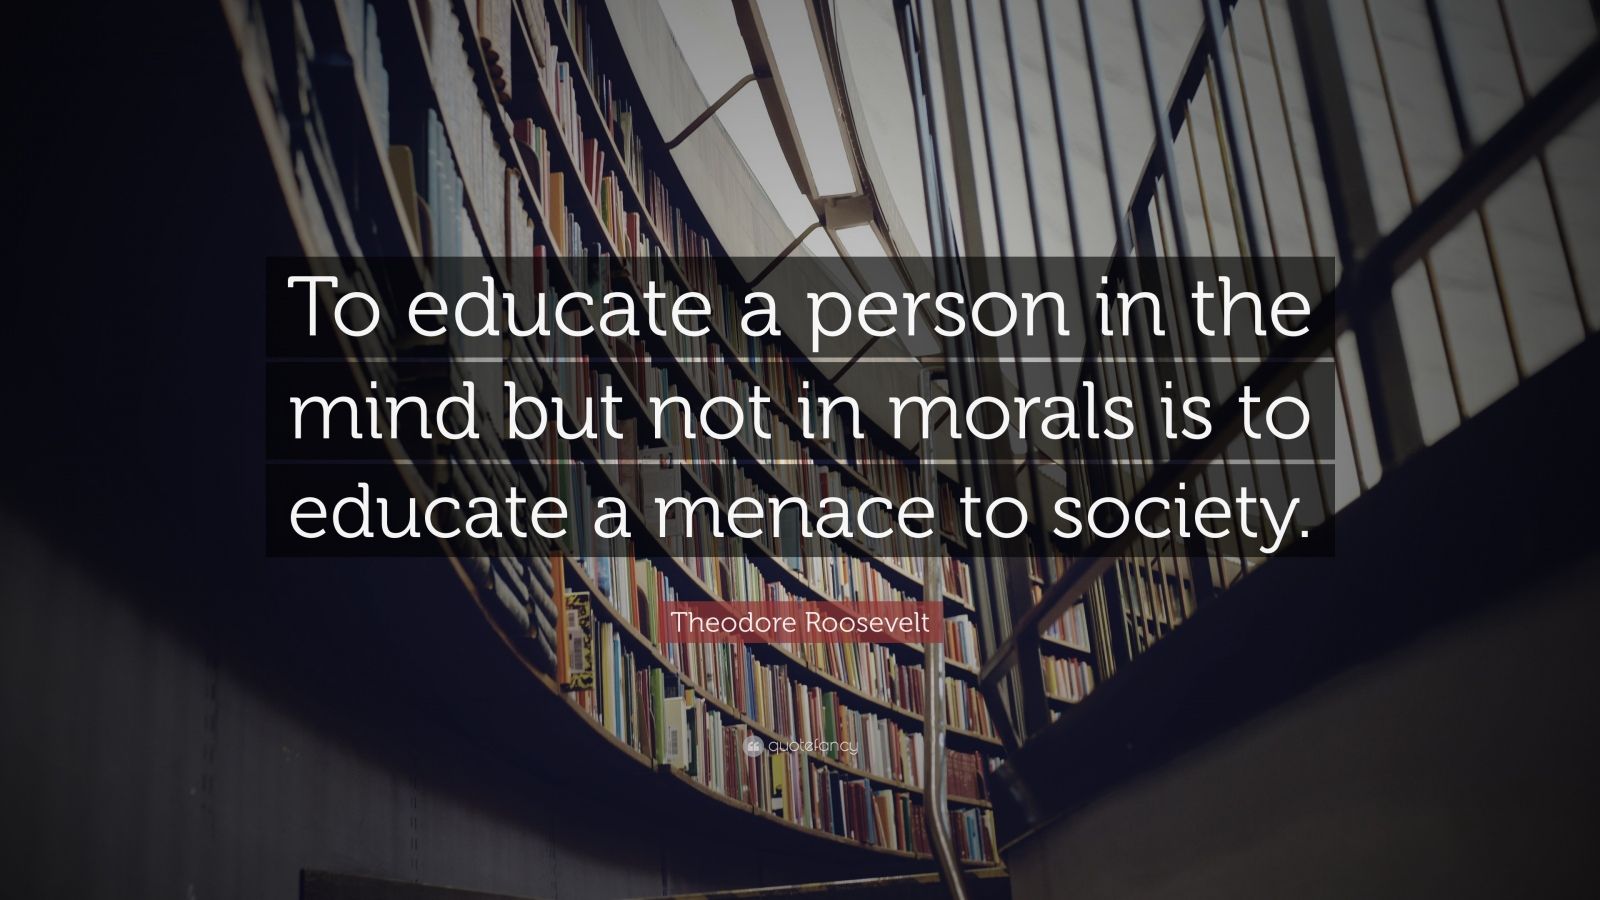 Theodore Roosevelt Quote: “To educate a person in the mind but not in morals is to educate a menace to society.”